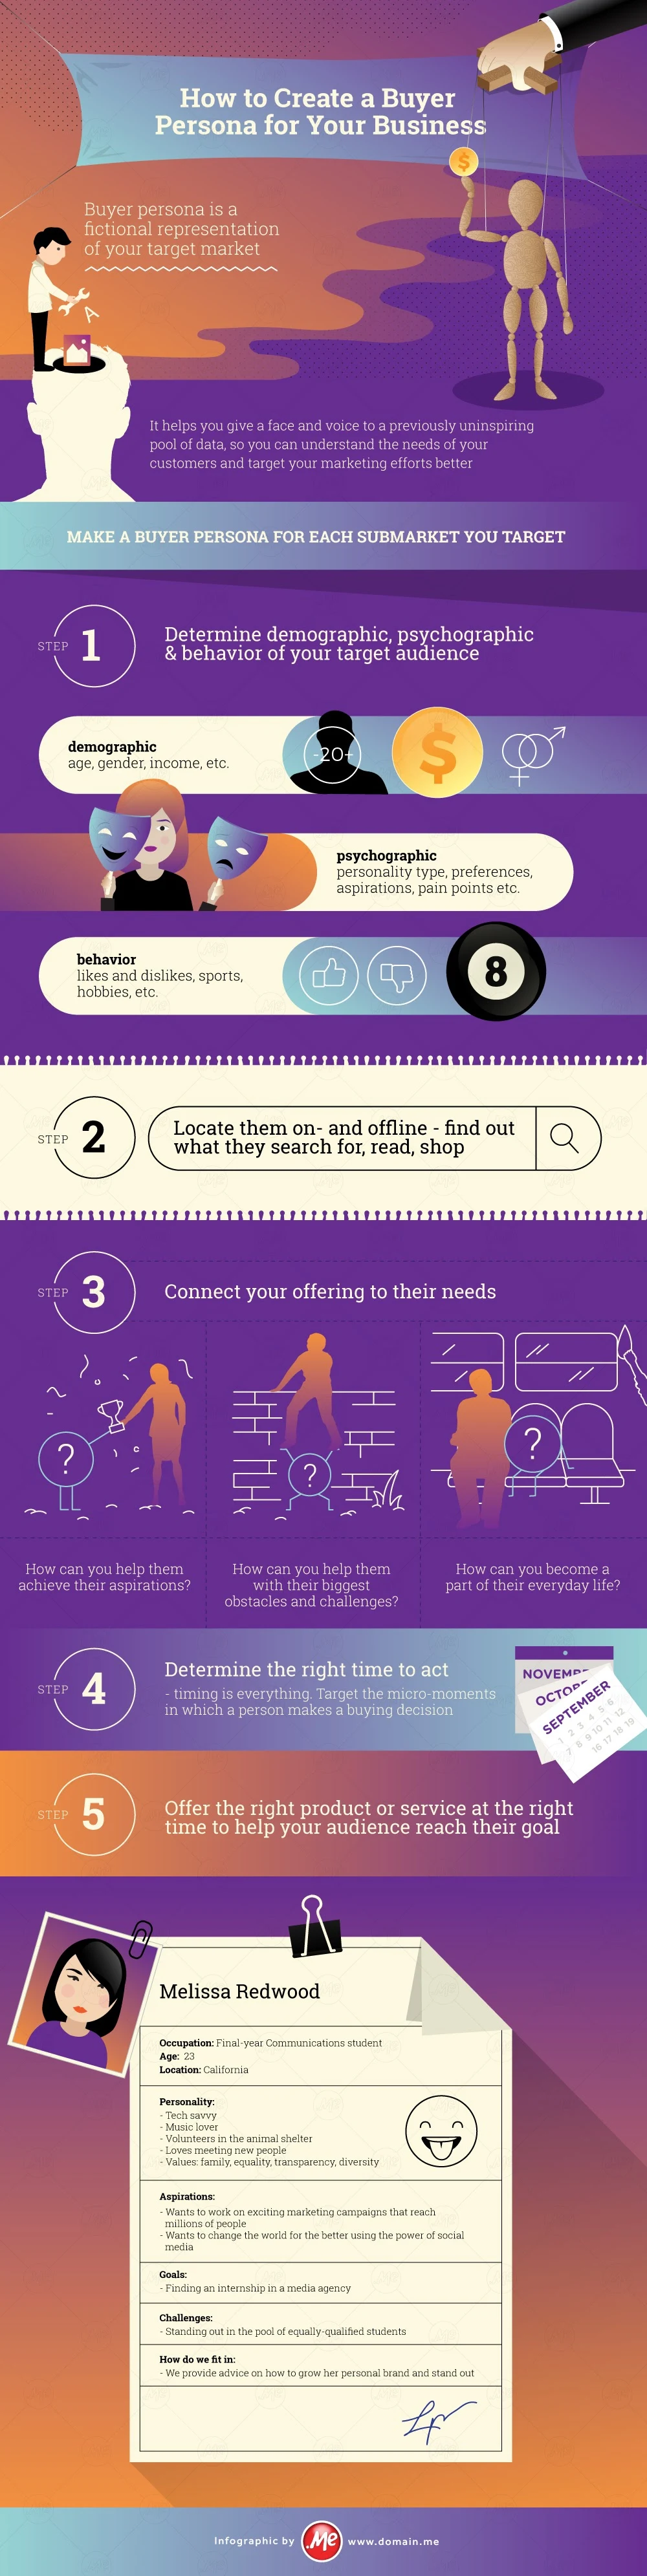 How to Create a Buyer Persona for Your Business #infographic